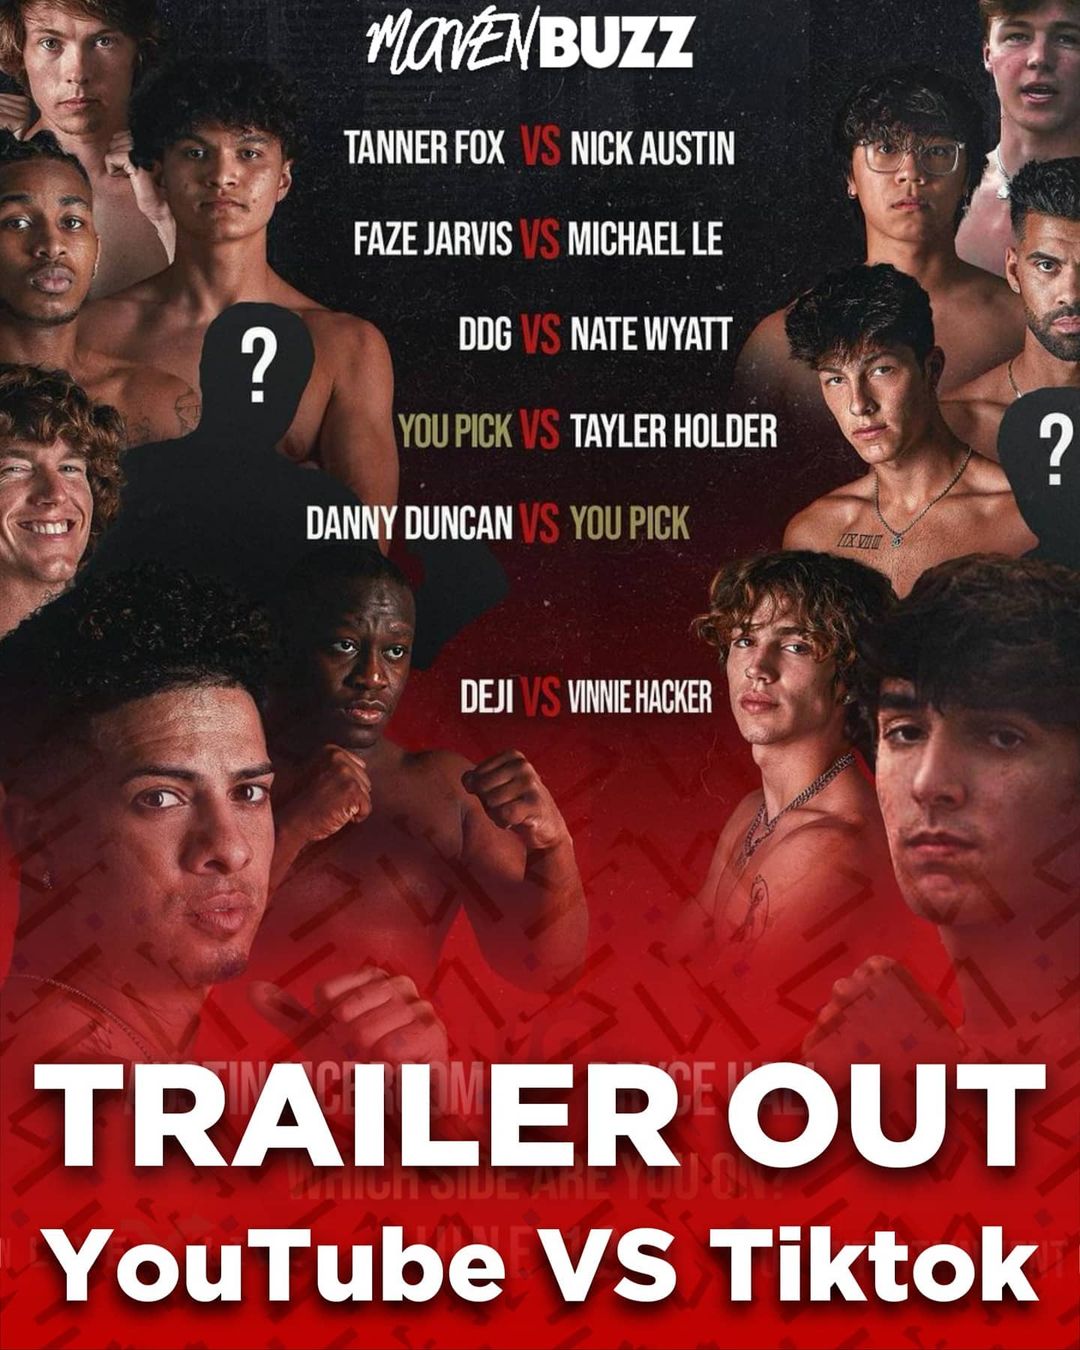 Youtube Vs Tiktok Boxing Event Official Trailer Out Now ...